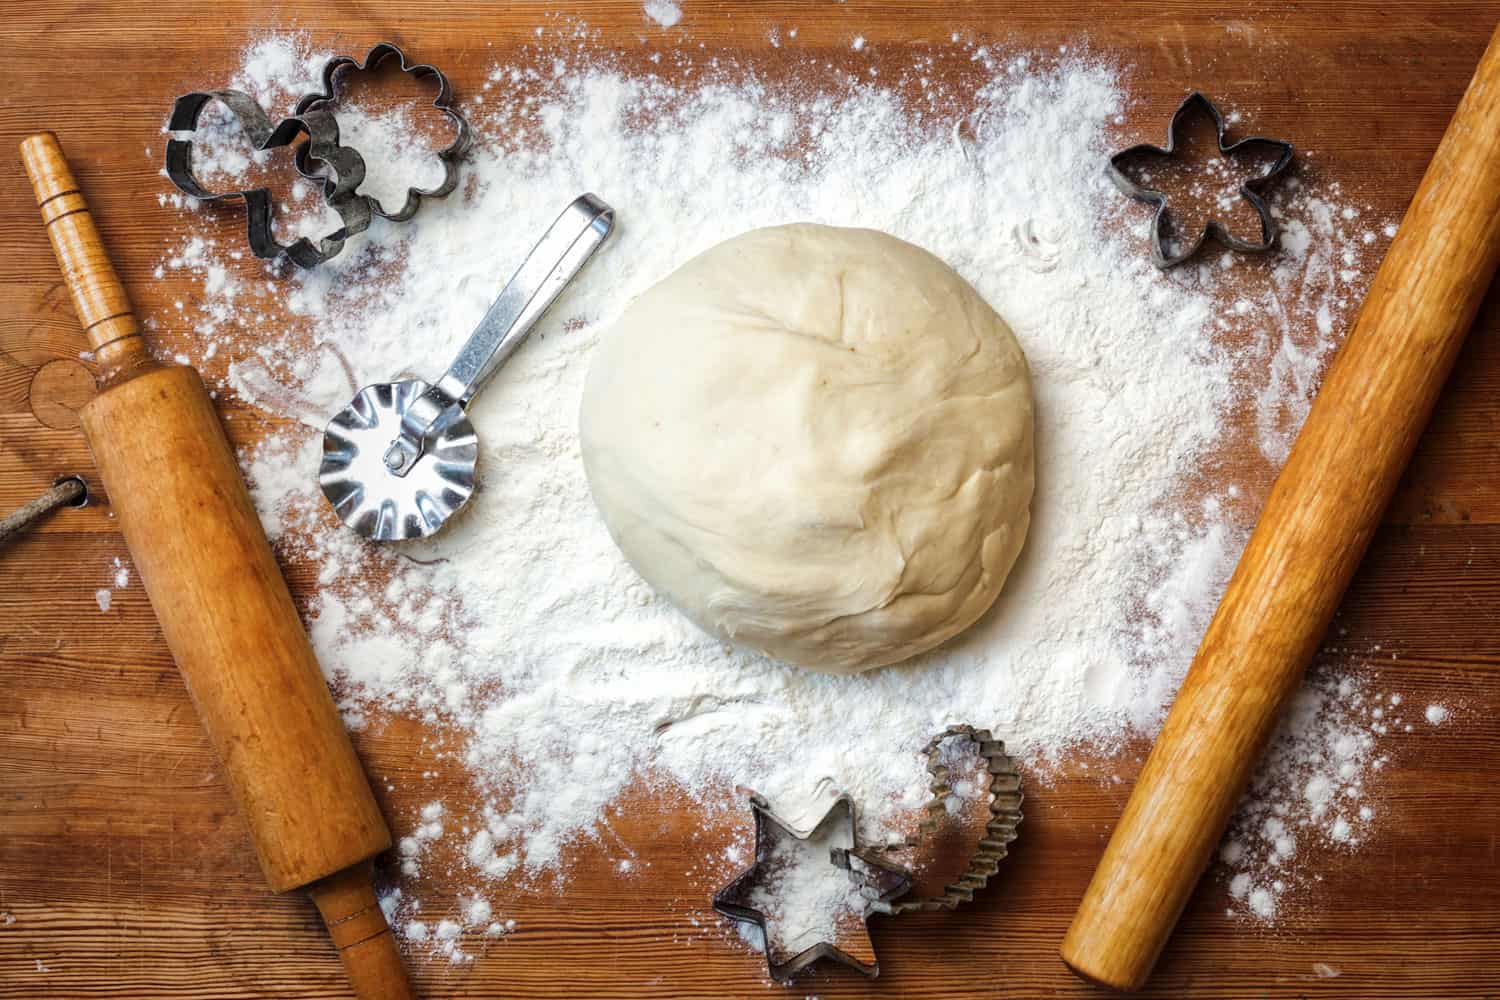 Letting your pizza dough sit for a long amount of time might ruin the texture and taste of a dough